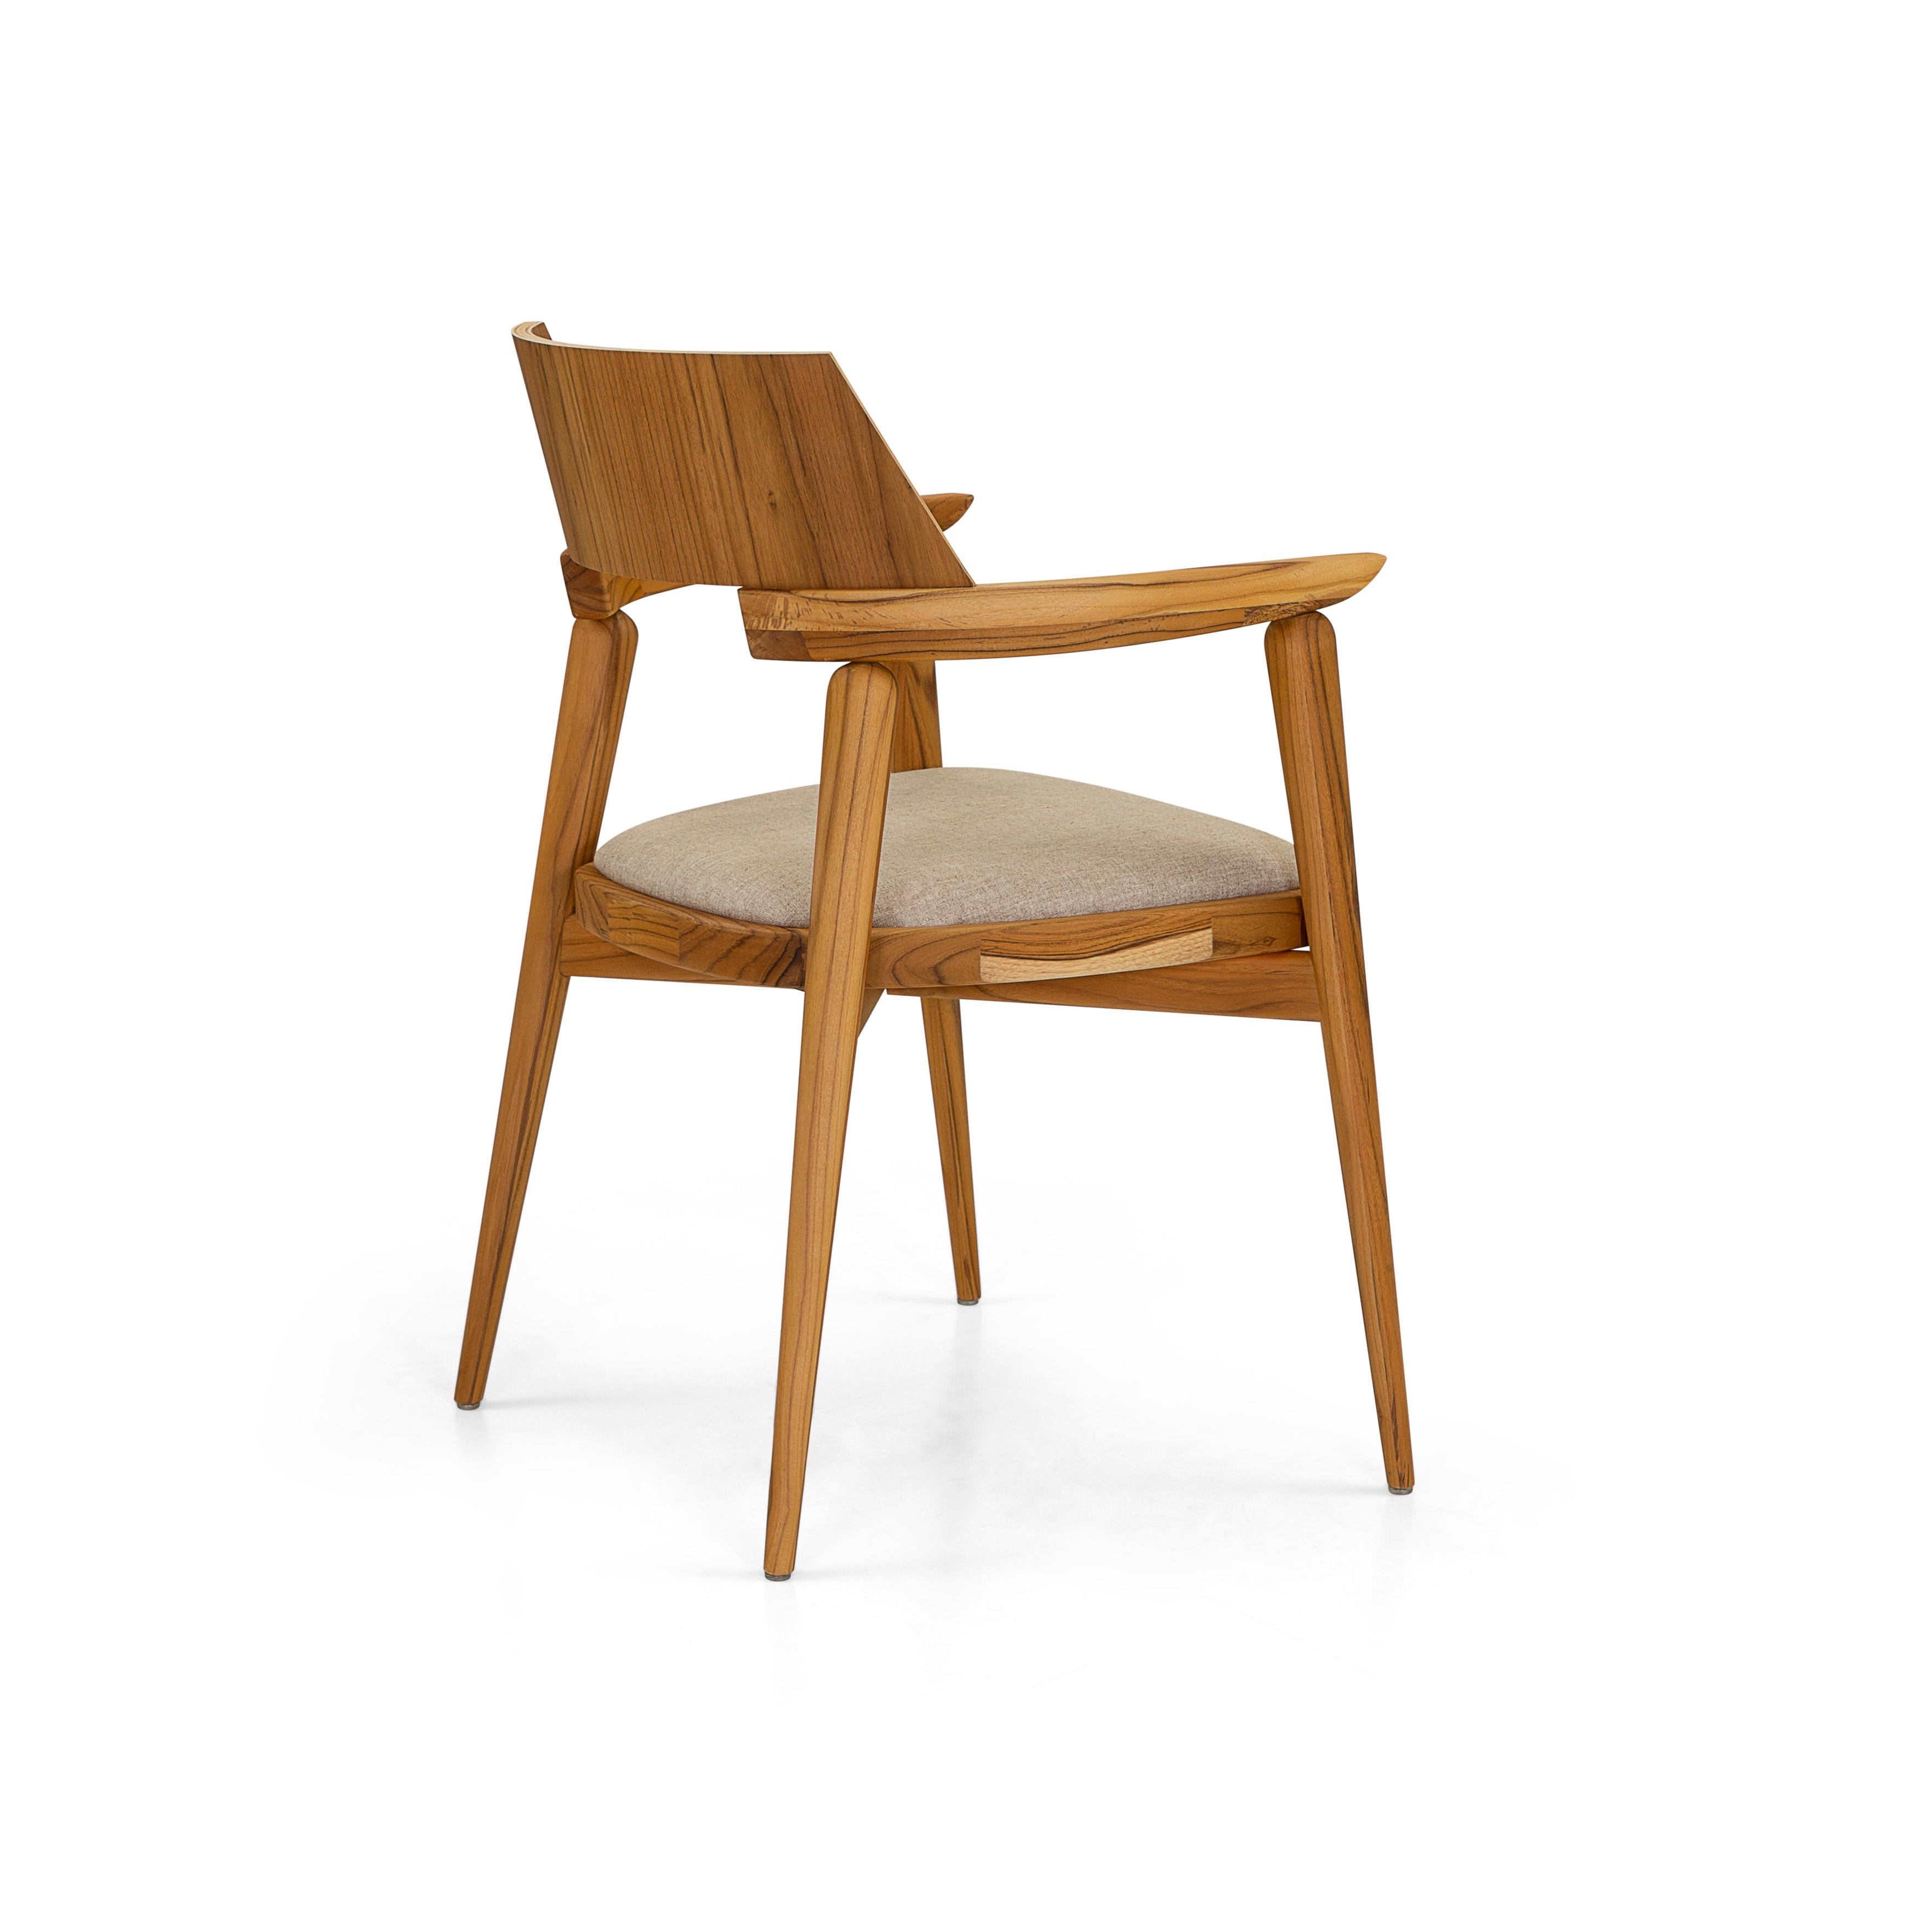 Bone Dining Chair / Desk Chair in Teak Wood Finish and Oatmeal Fabric In New Condition For Sale In Miami, FL